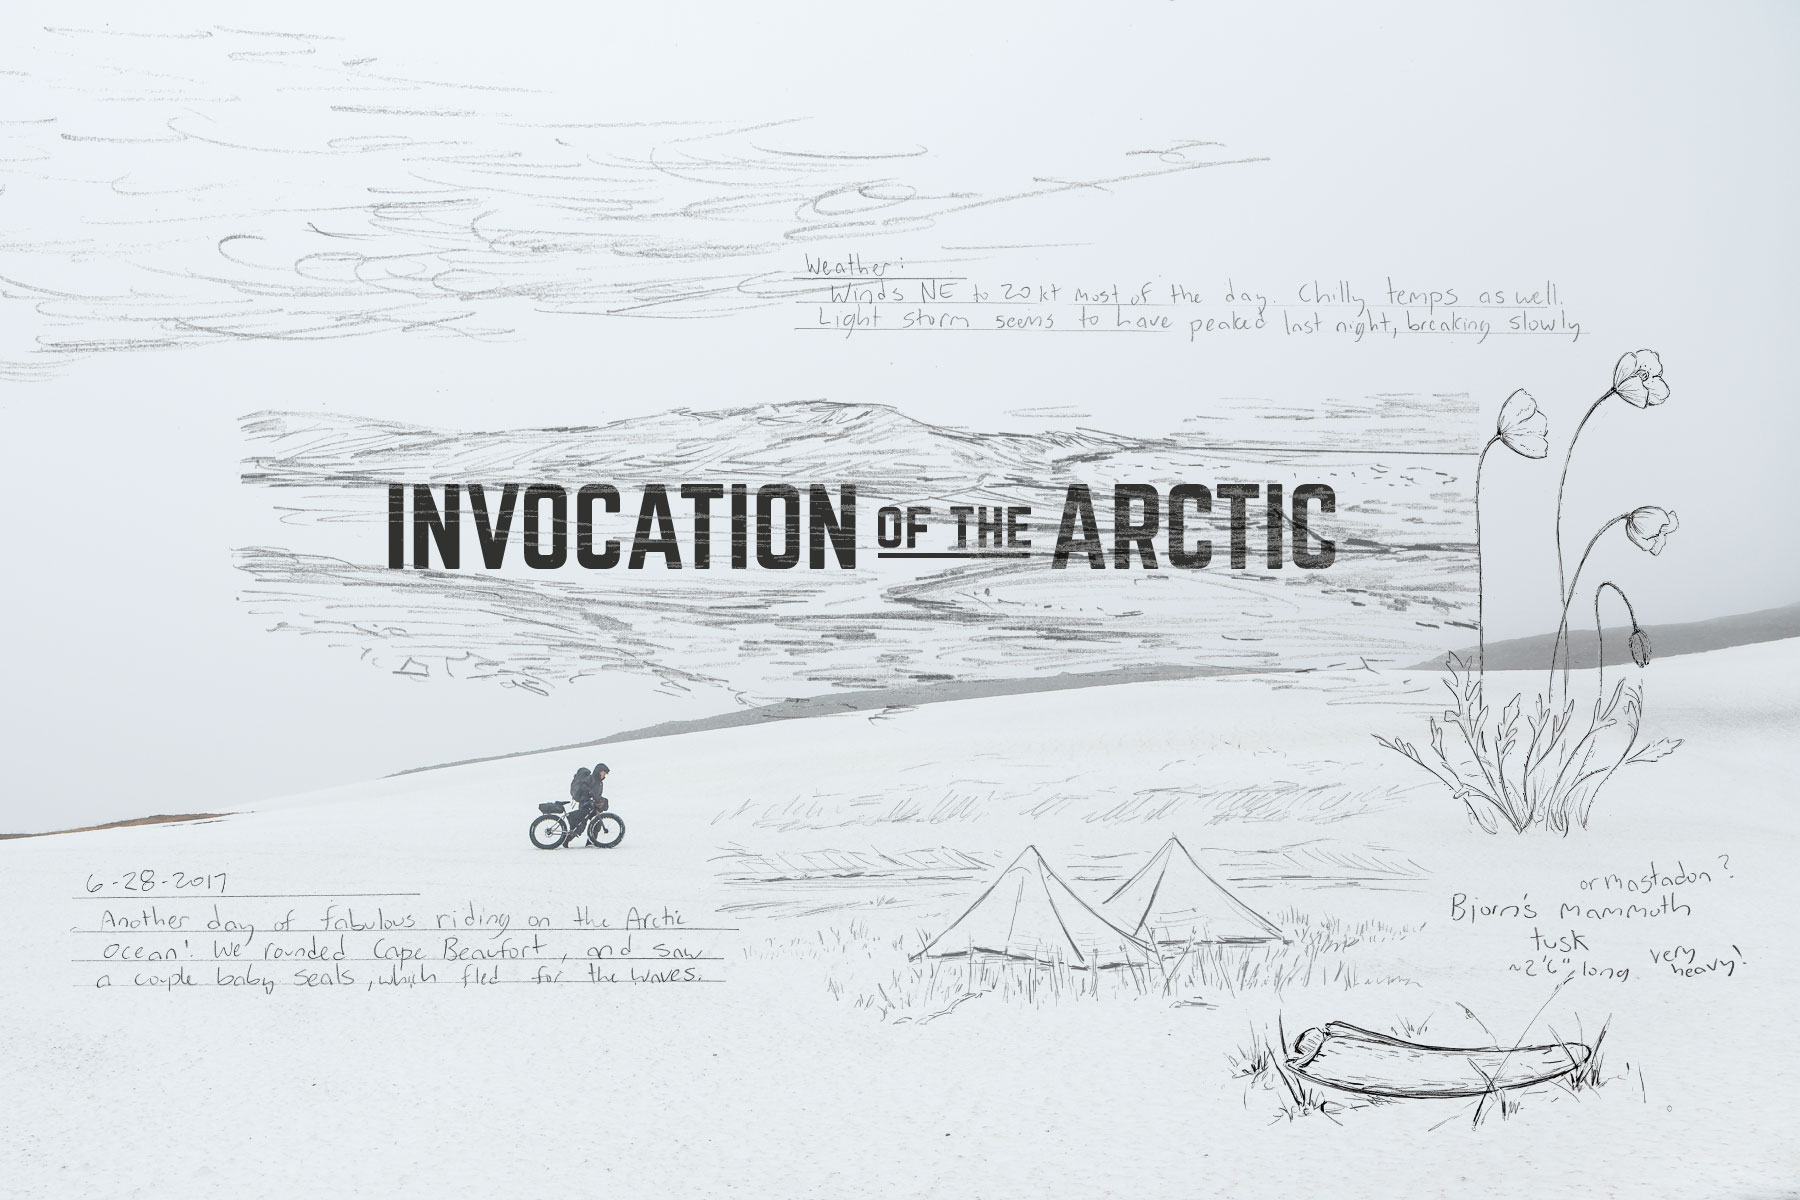 Invocation of the Arctic